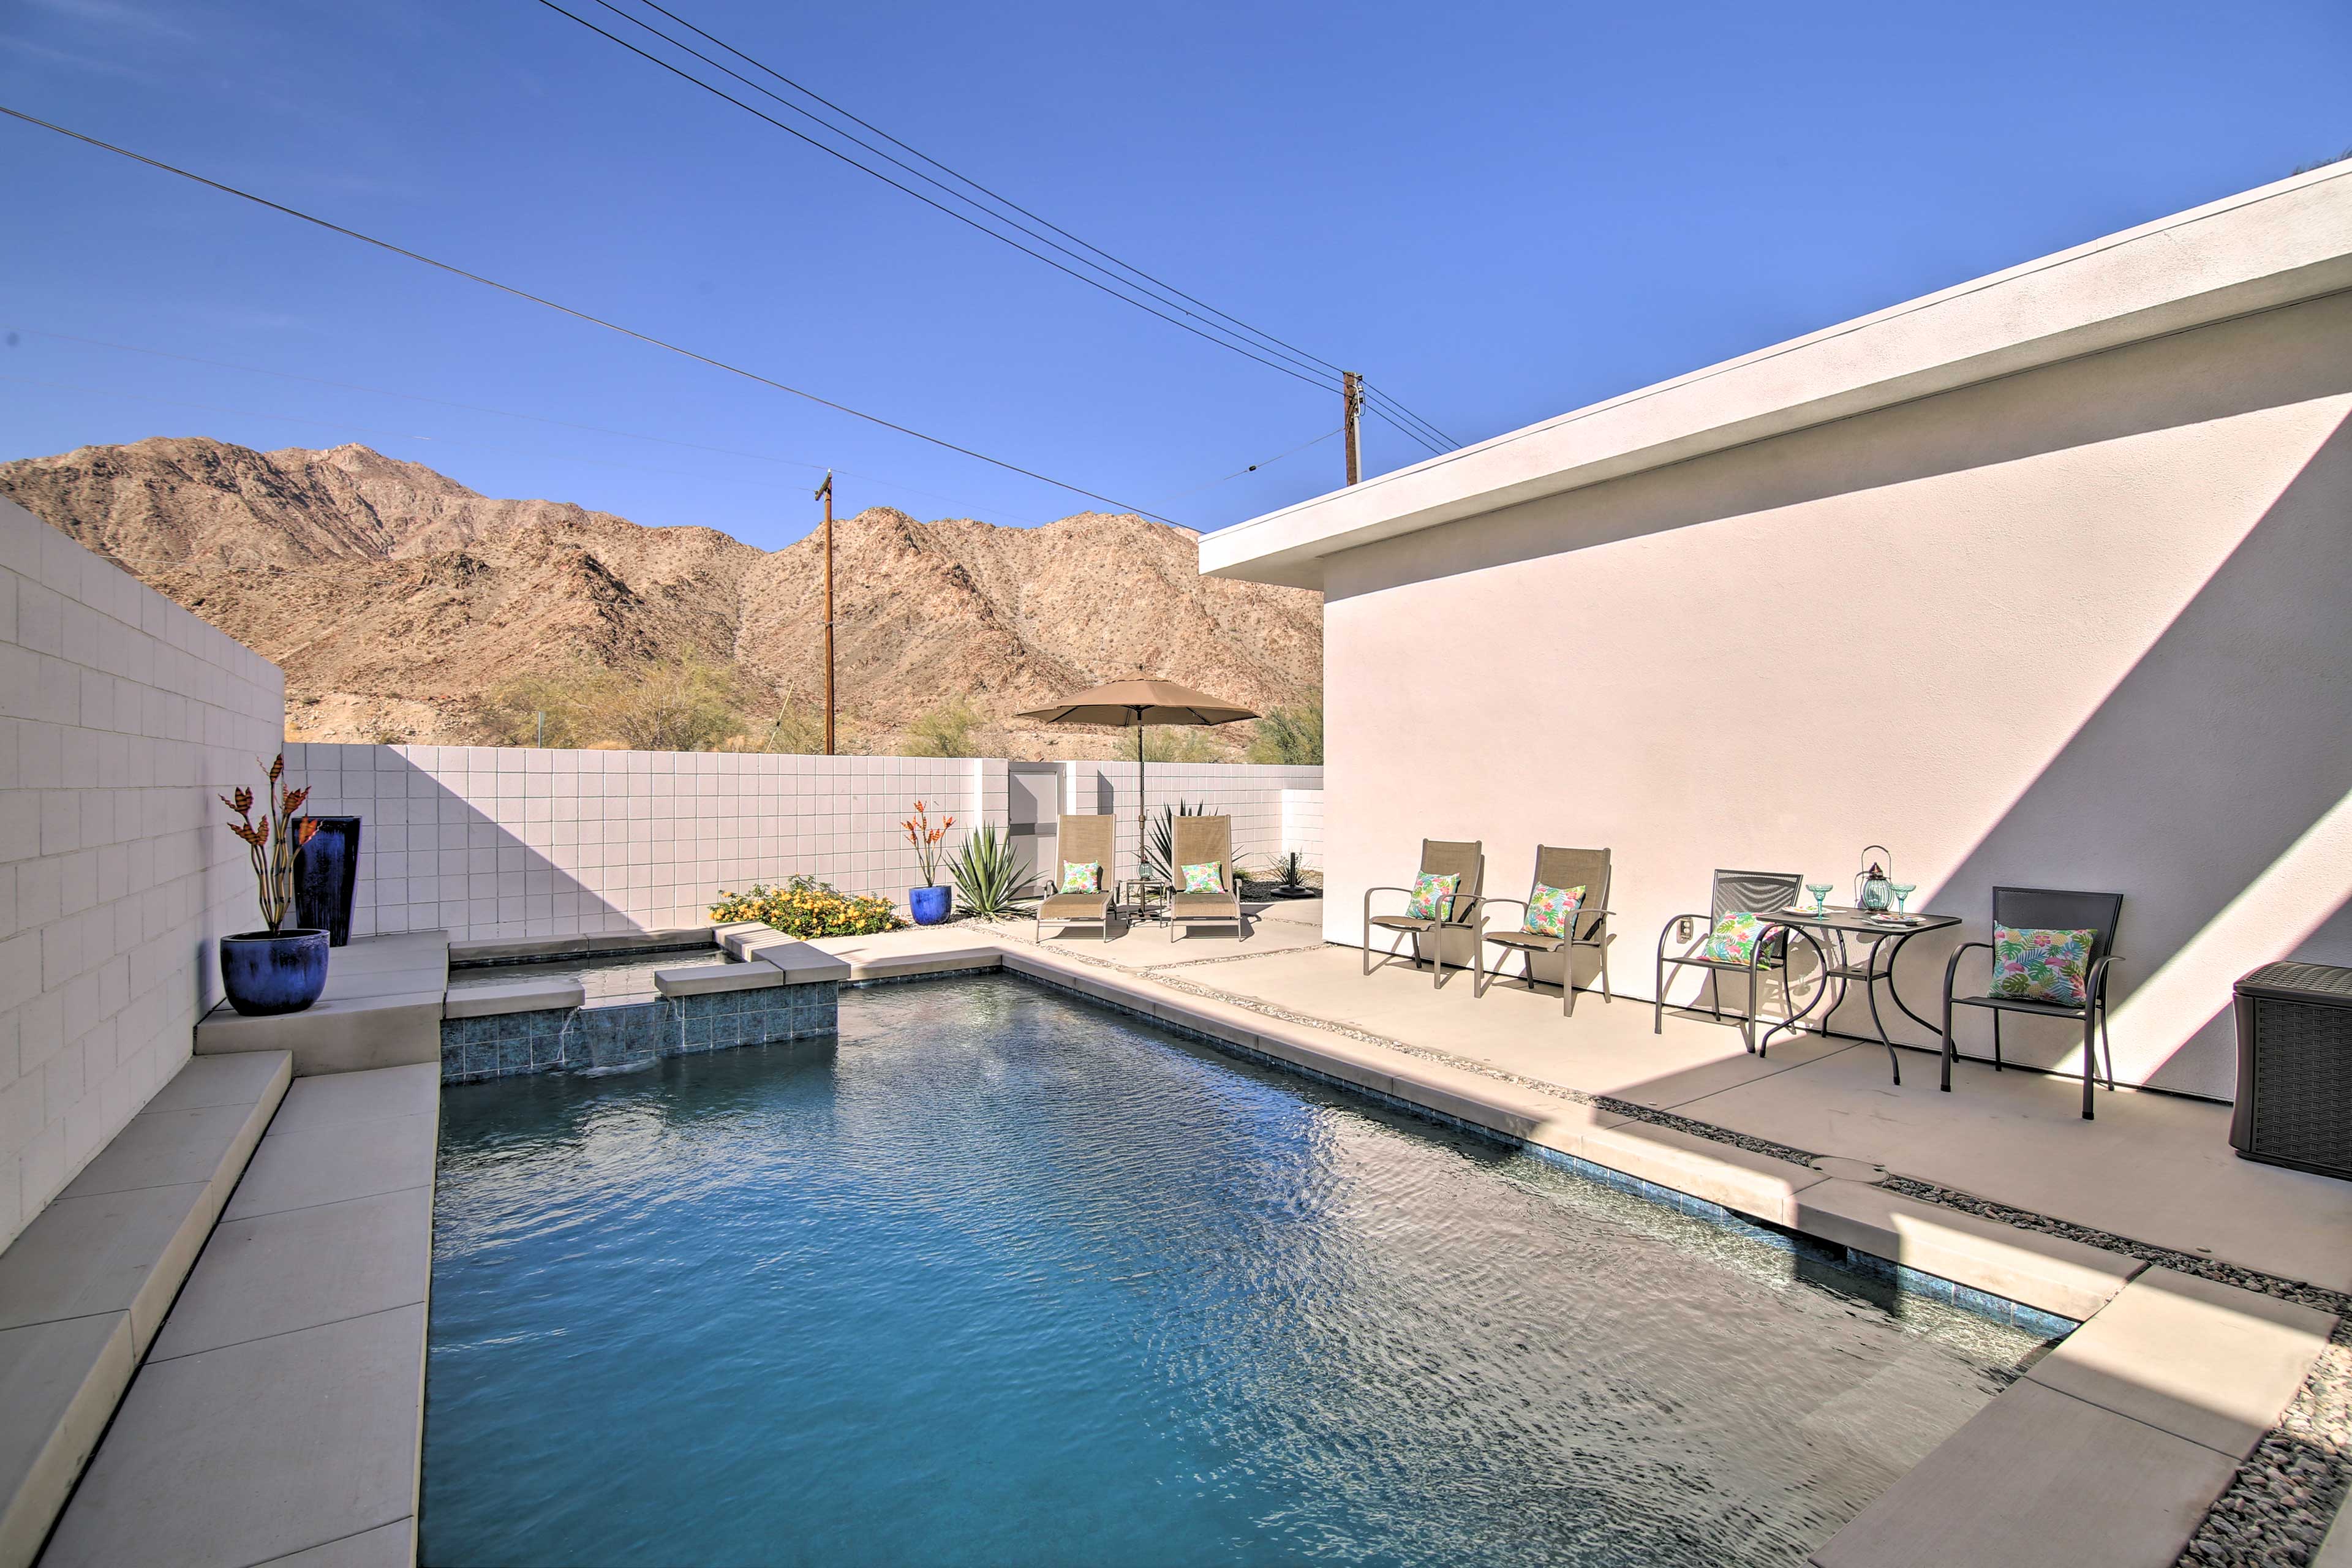 Property Image 2 - 768332: ’Desert Pearl’ 3BR Oasis w/ Private Pool!